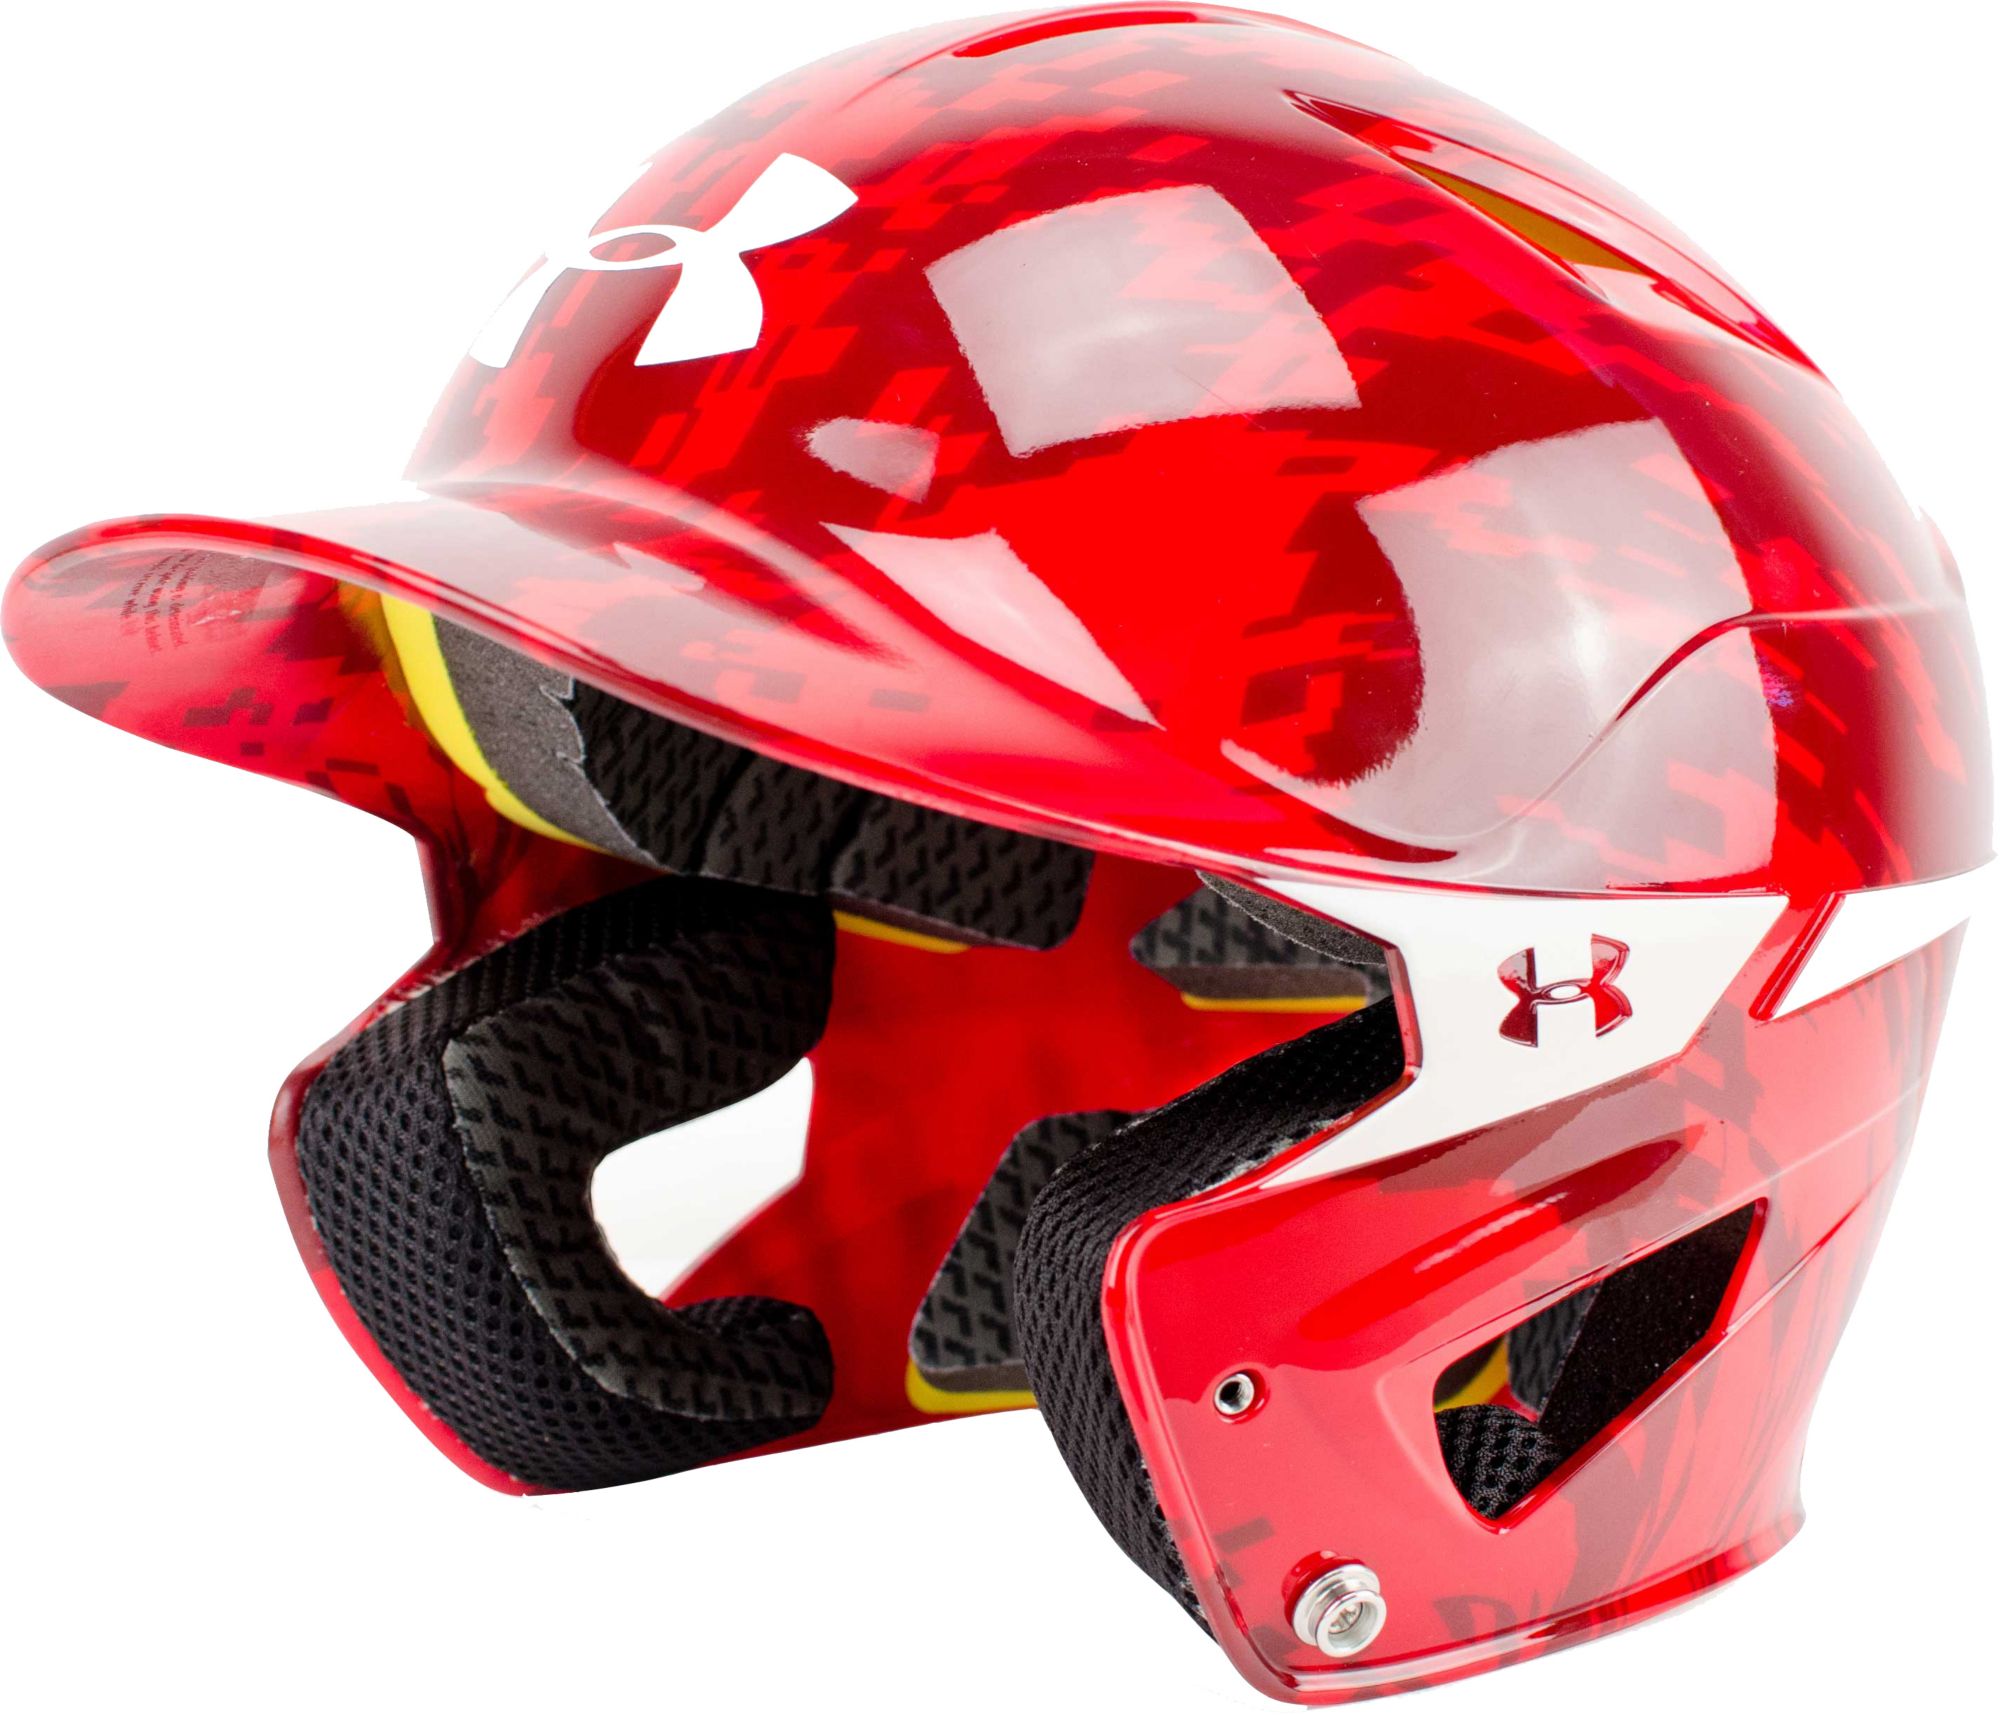 jaw guard for under armour helmet